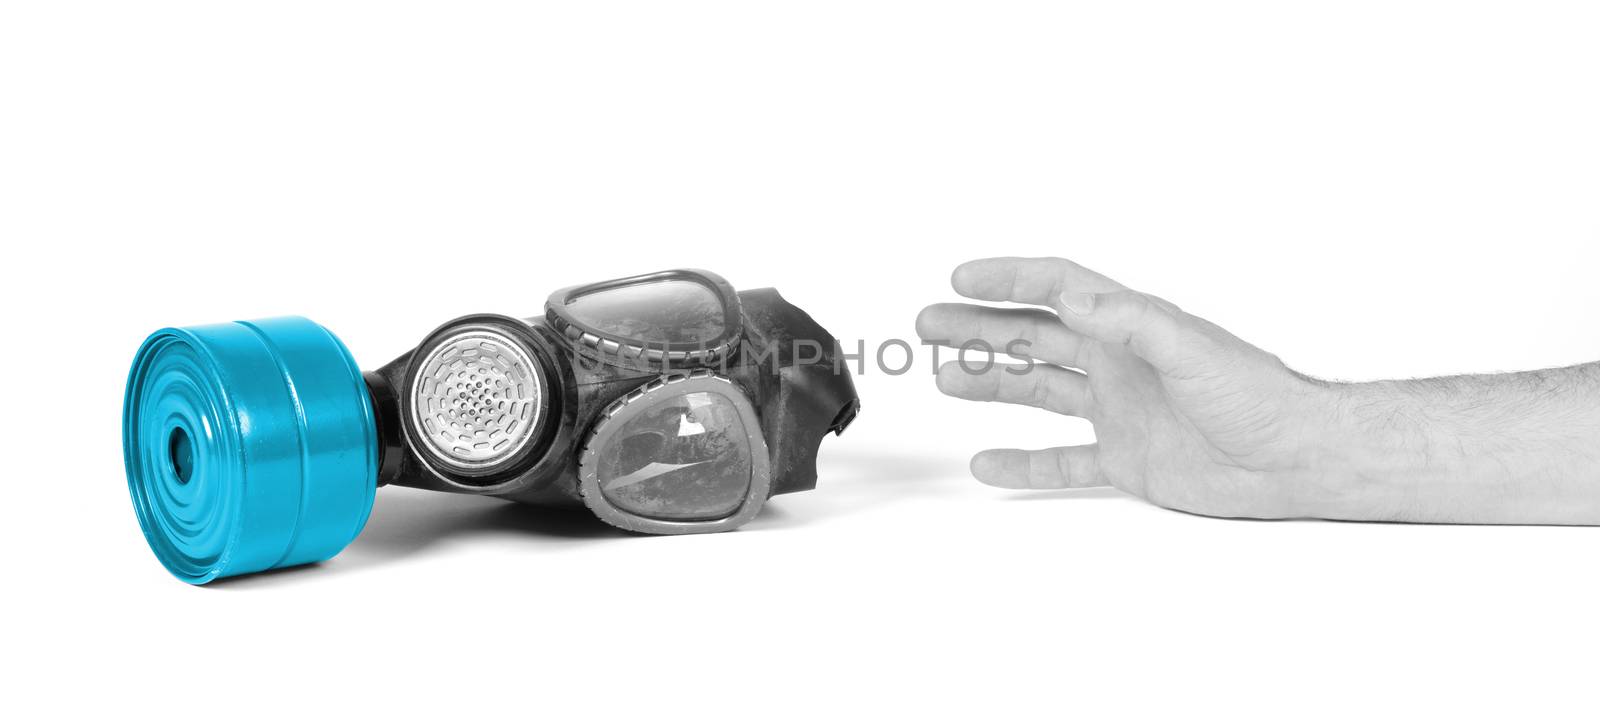 Arm reaching for vintage gasmask isolated on white - Blue filter by michaklootwijk